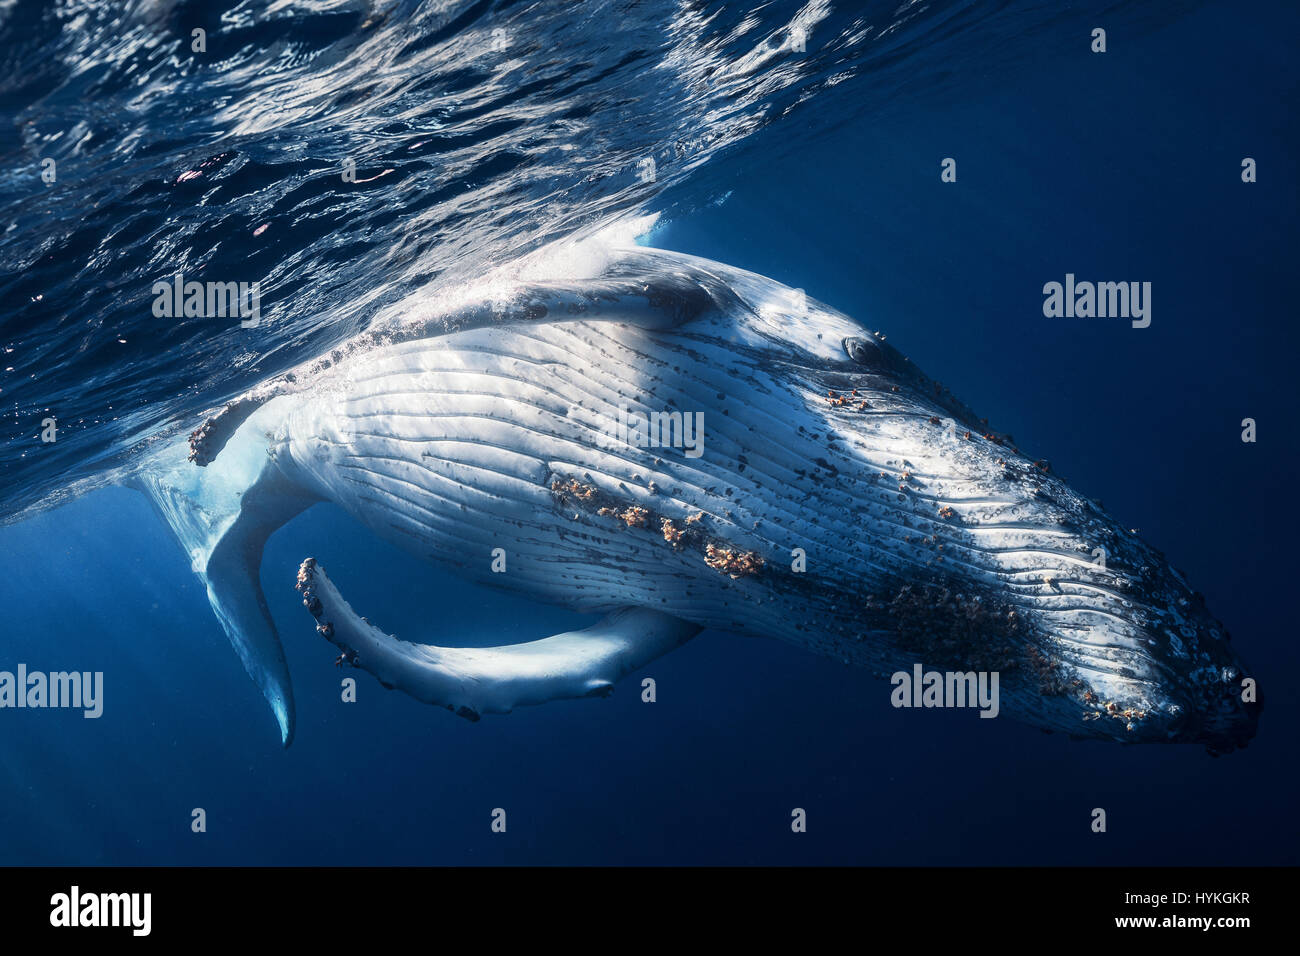 REUNION ISLAND, INDIAN OCEAN: MOVING images of forty tonne humpbacks swimming in harmony with divers eighty feet underwater have been captured. Weighing more than THREE London buses, the humbling pictures show the sheer size and beauty of these giants of the sea. Despite their colossal size these ocean mammals can be seen gliding through the water as if weightless.  Other pictures reveal the tiny diver in close proximity, observing the undeniable bond between this intimate whale family. Underwater photographer Gabriel Barathieu (32) took these shots in an encounter lasting twenty-five minutes, Stock Photo